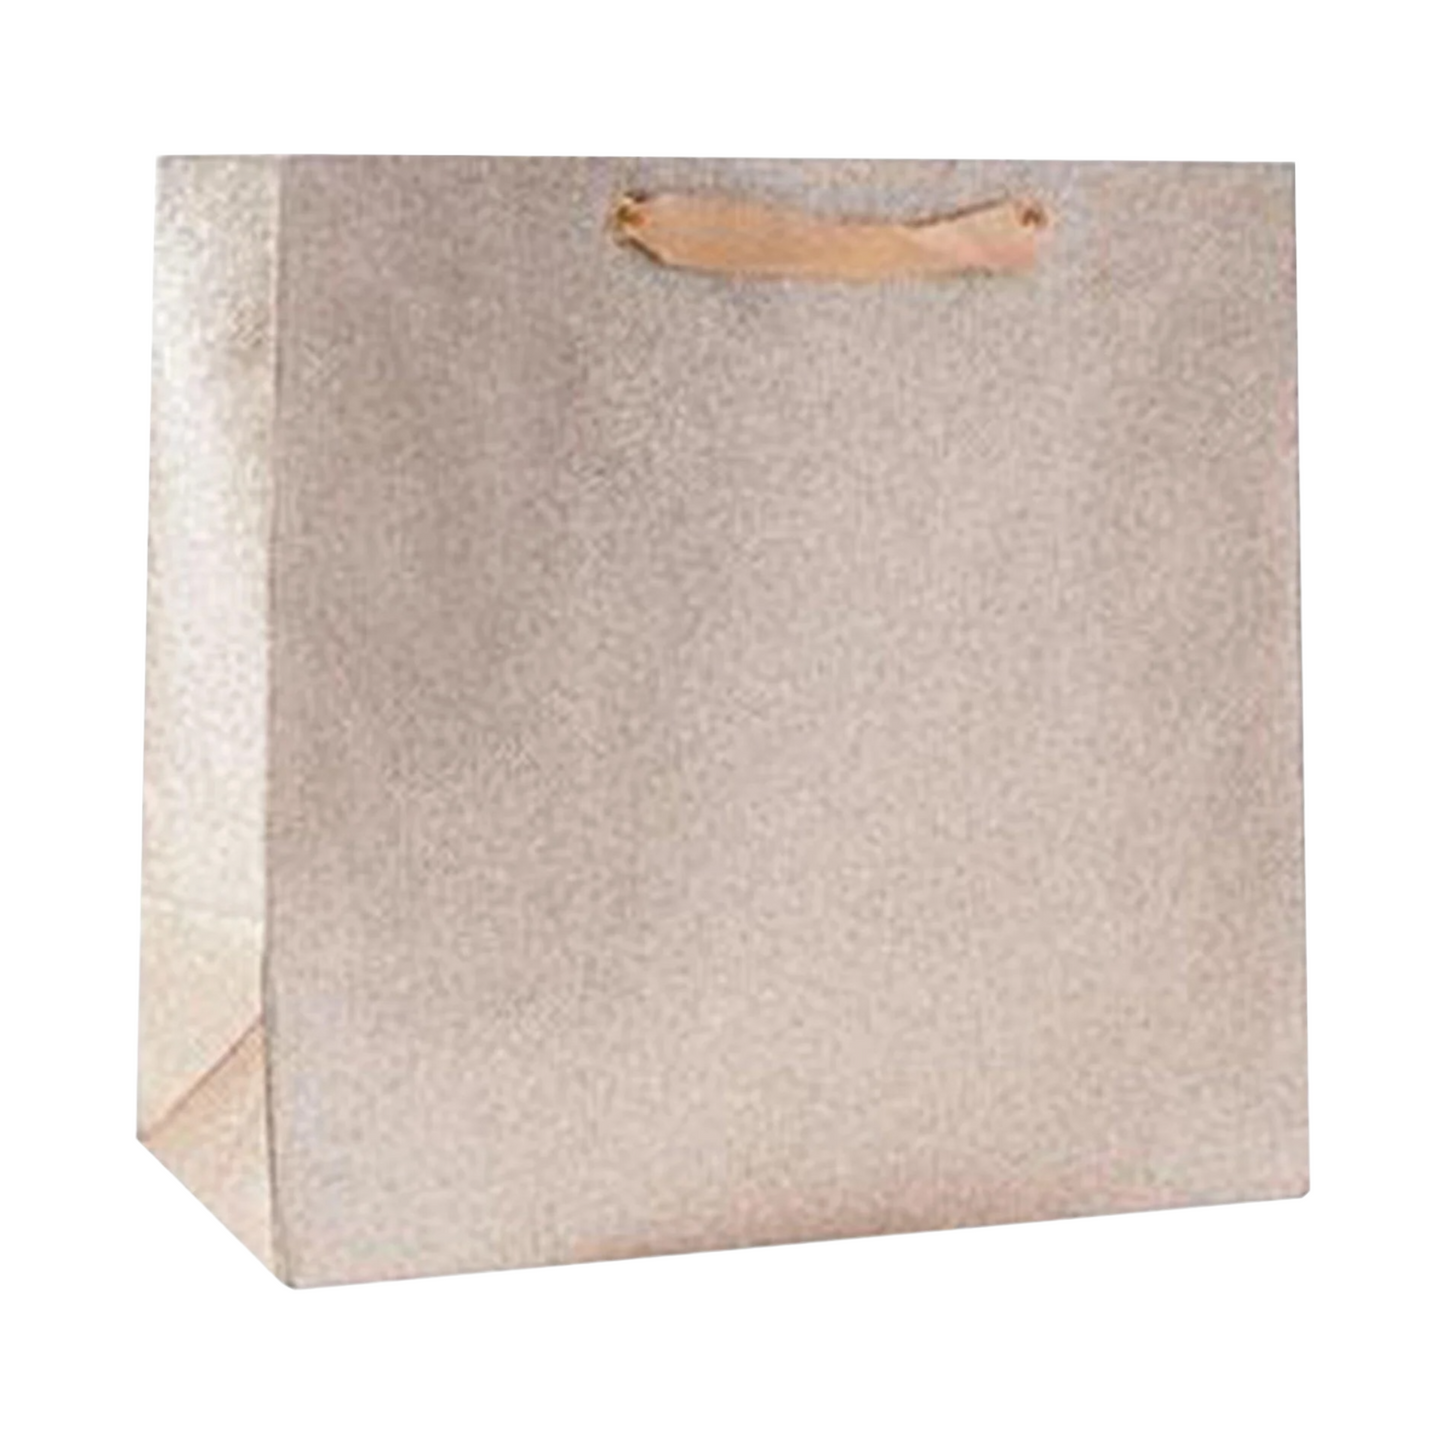 Large Champagne Glitter Gift Bag by Waste Not Paper